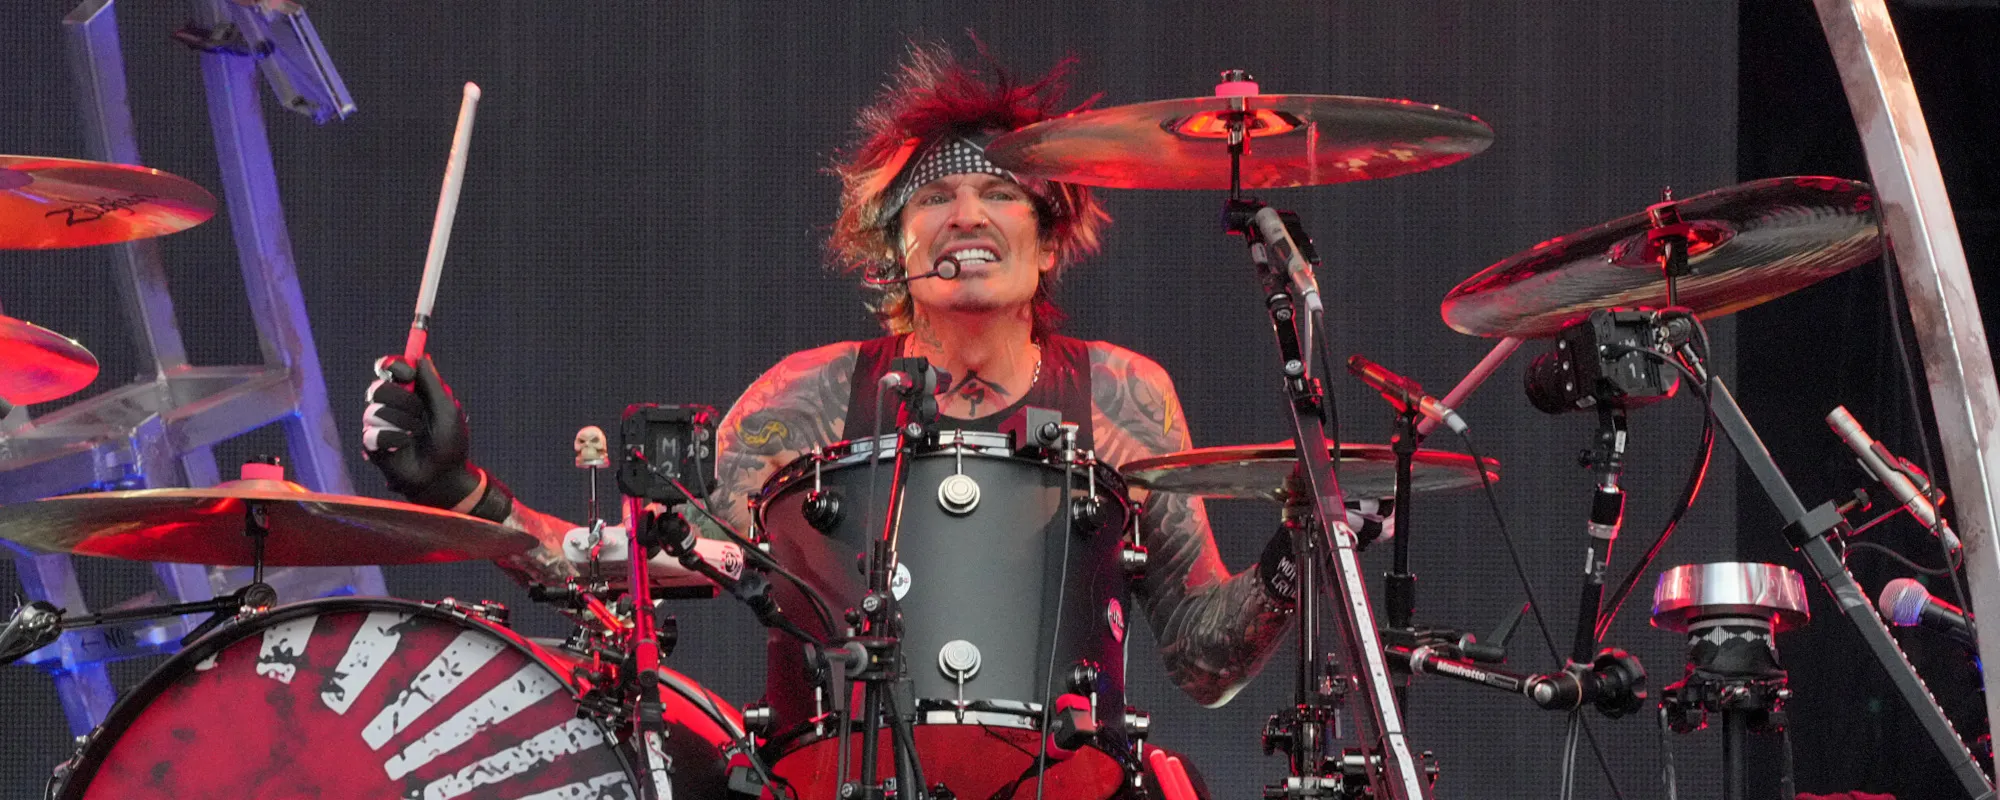 Tommy Lee Breaks Ribs, Exits Mötley Crüe’s Reunion Tour Kickoff